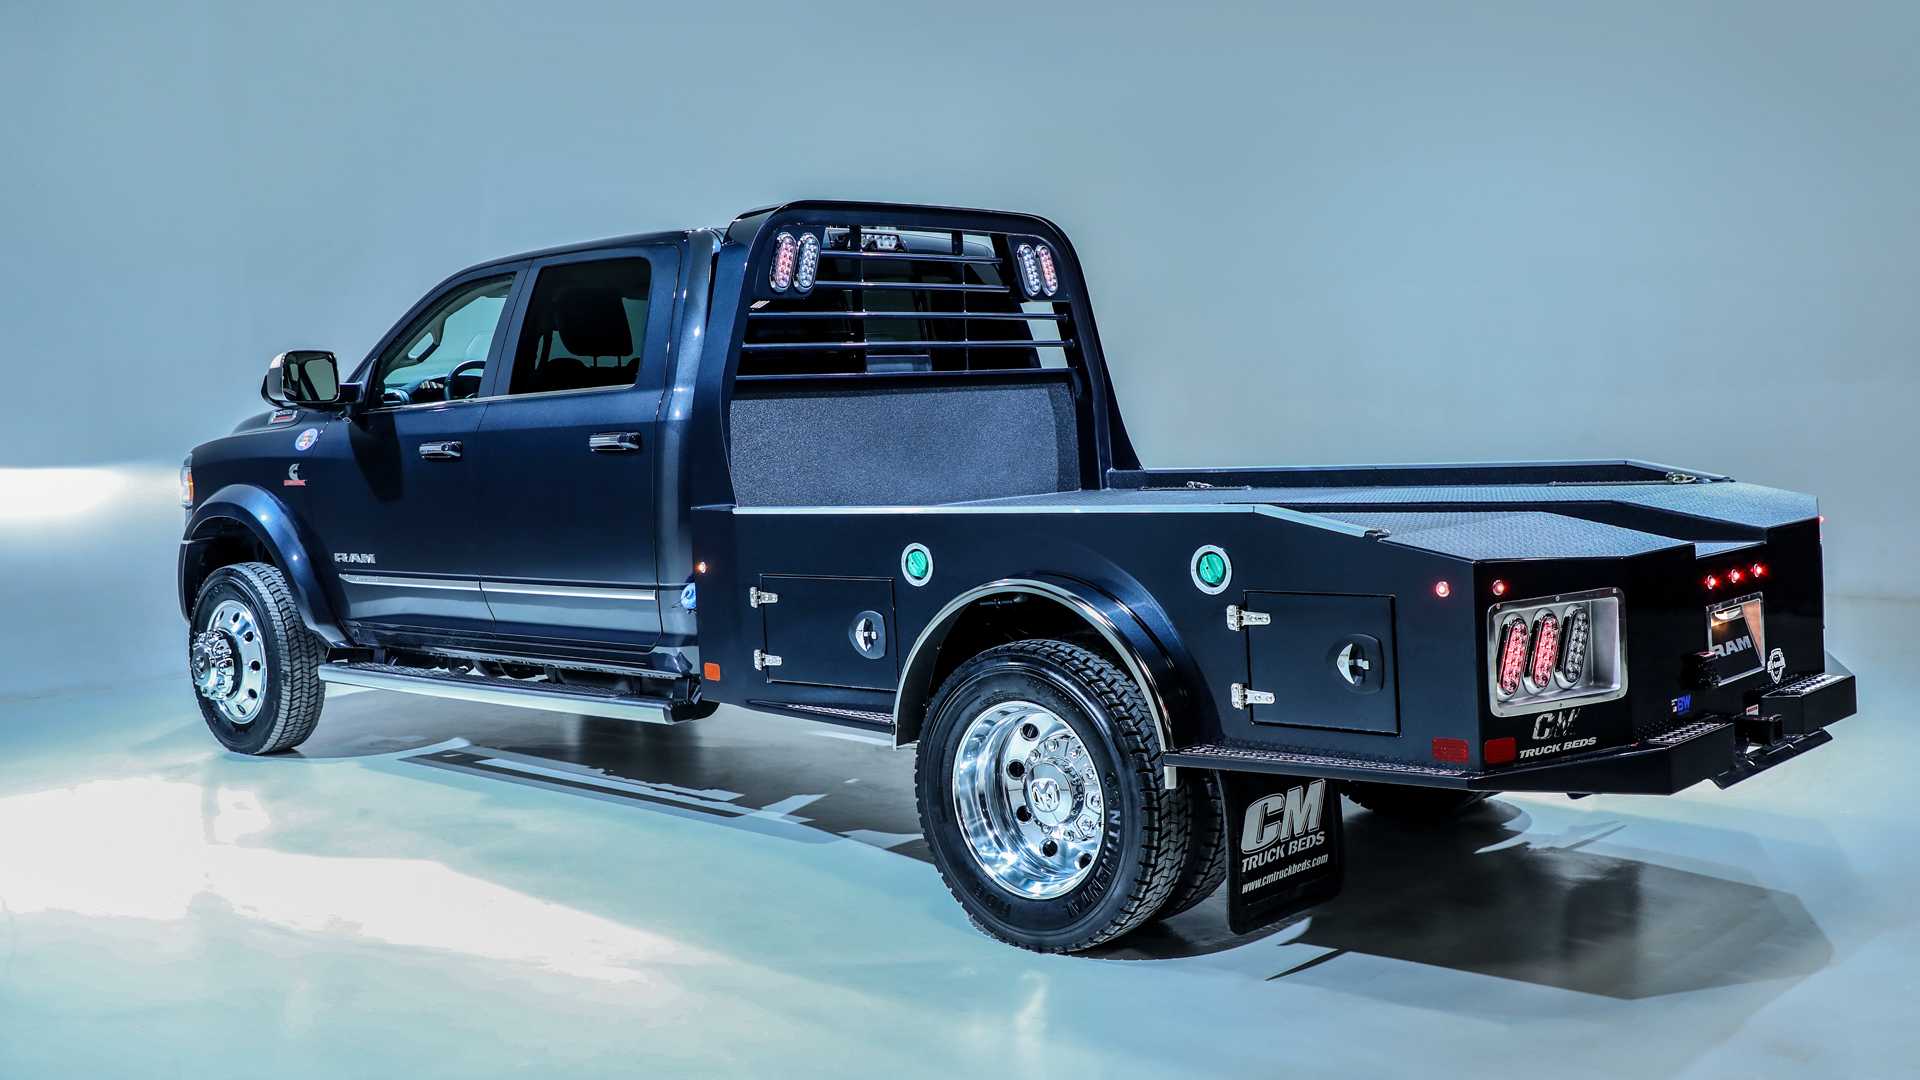 2019-ram-chassis-cab (6)